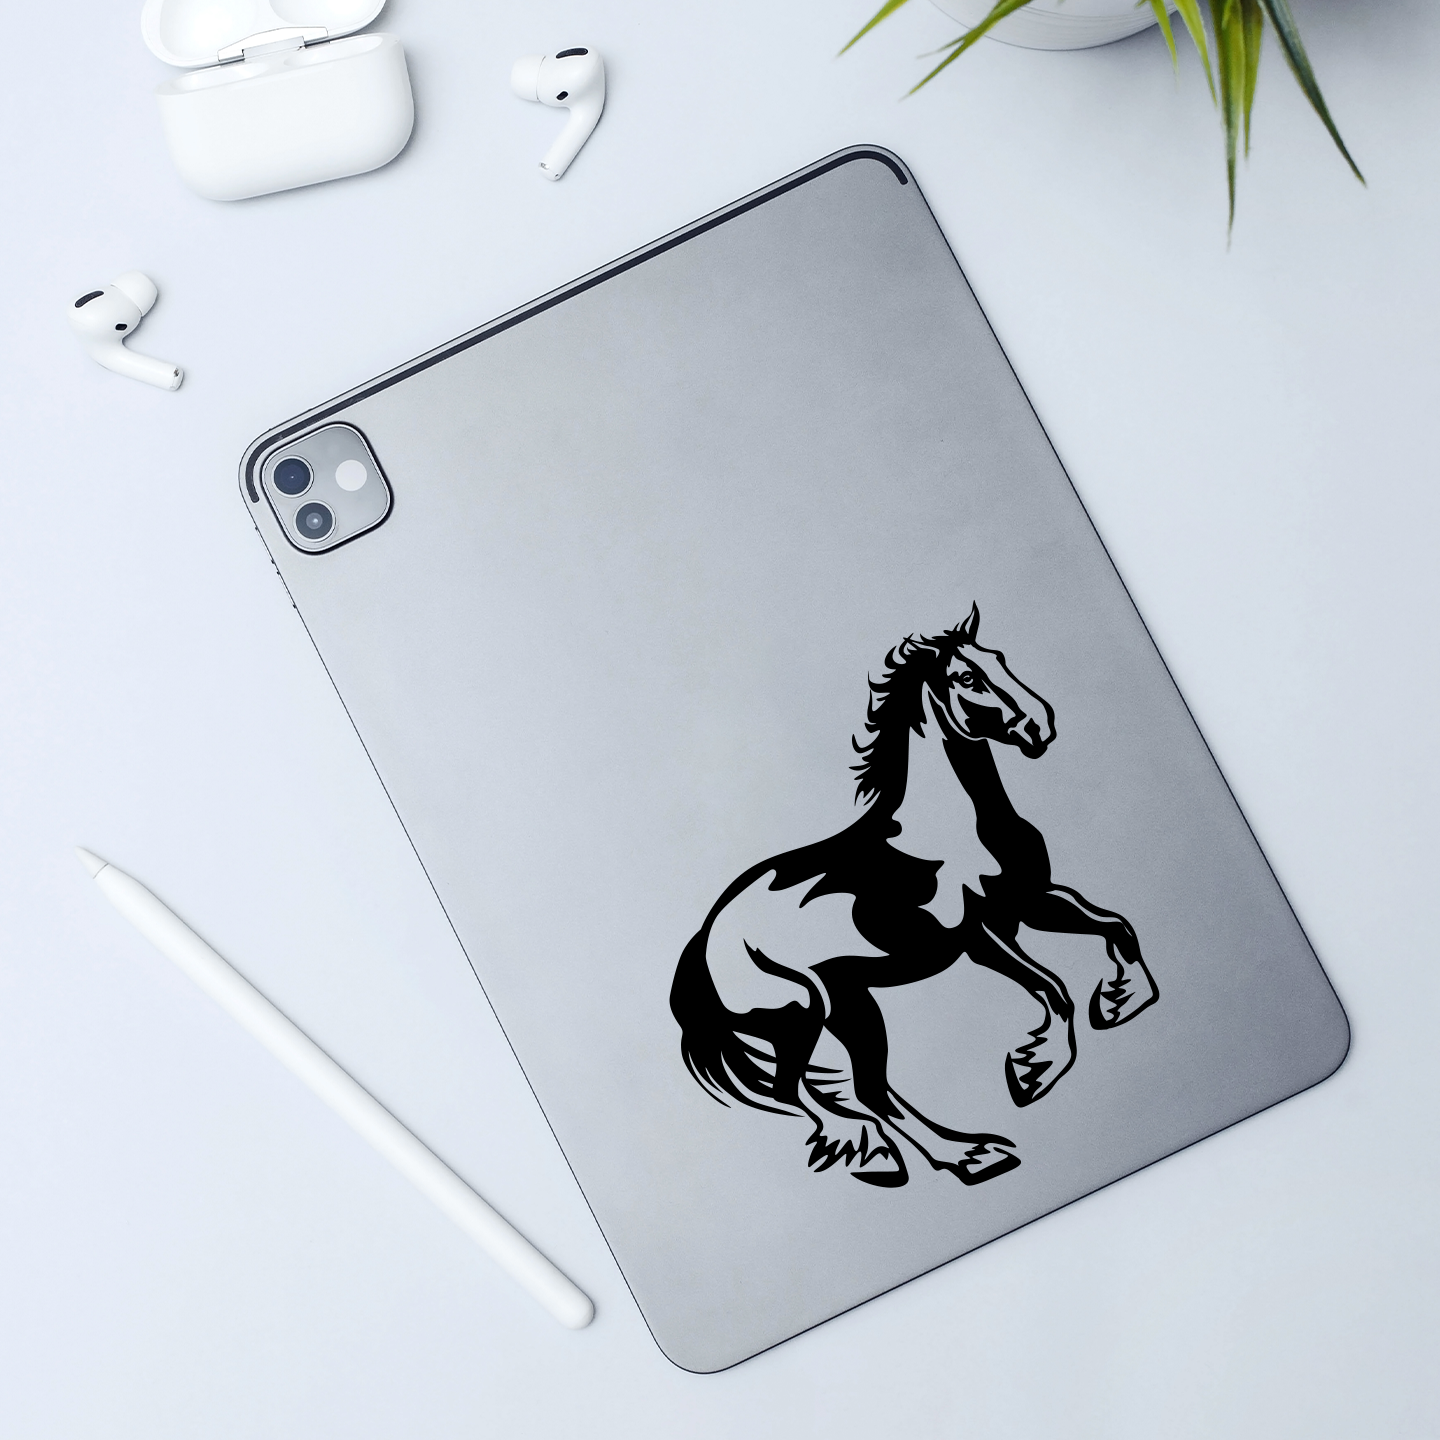 Clydesdale Draught Horse Sticker